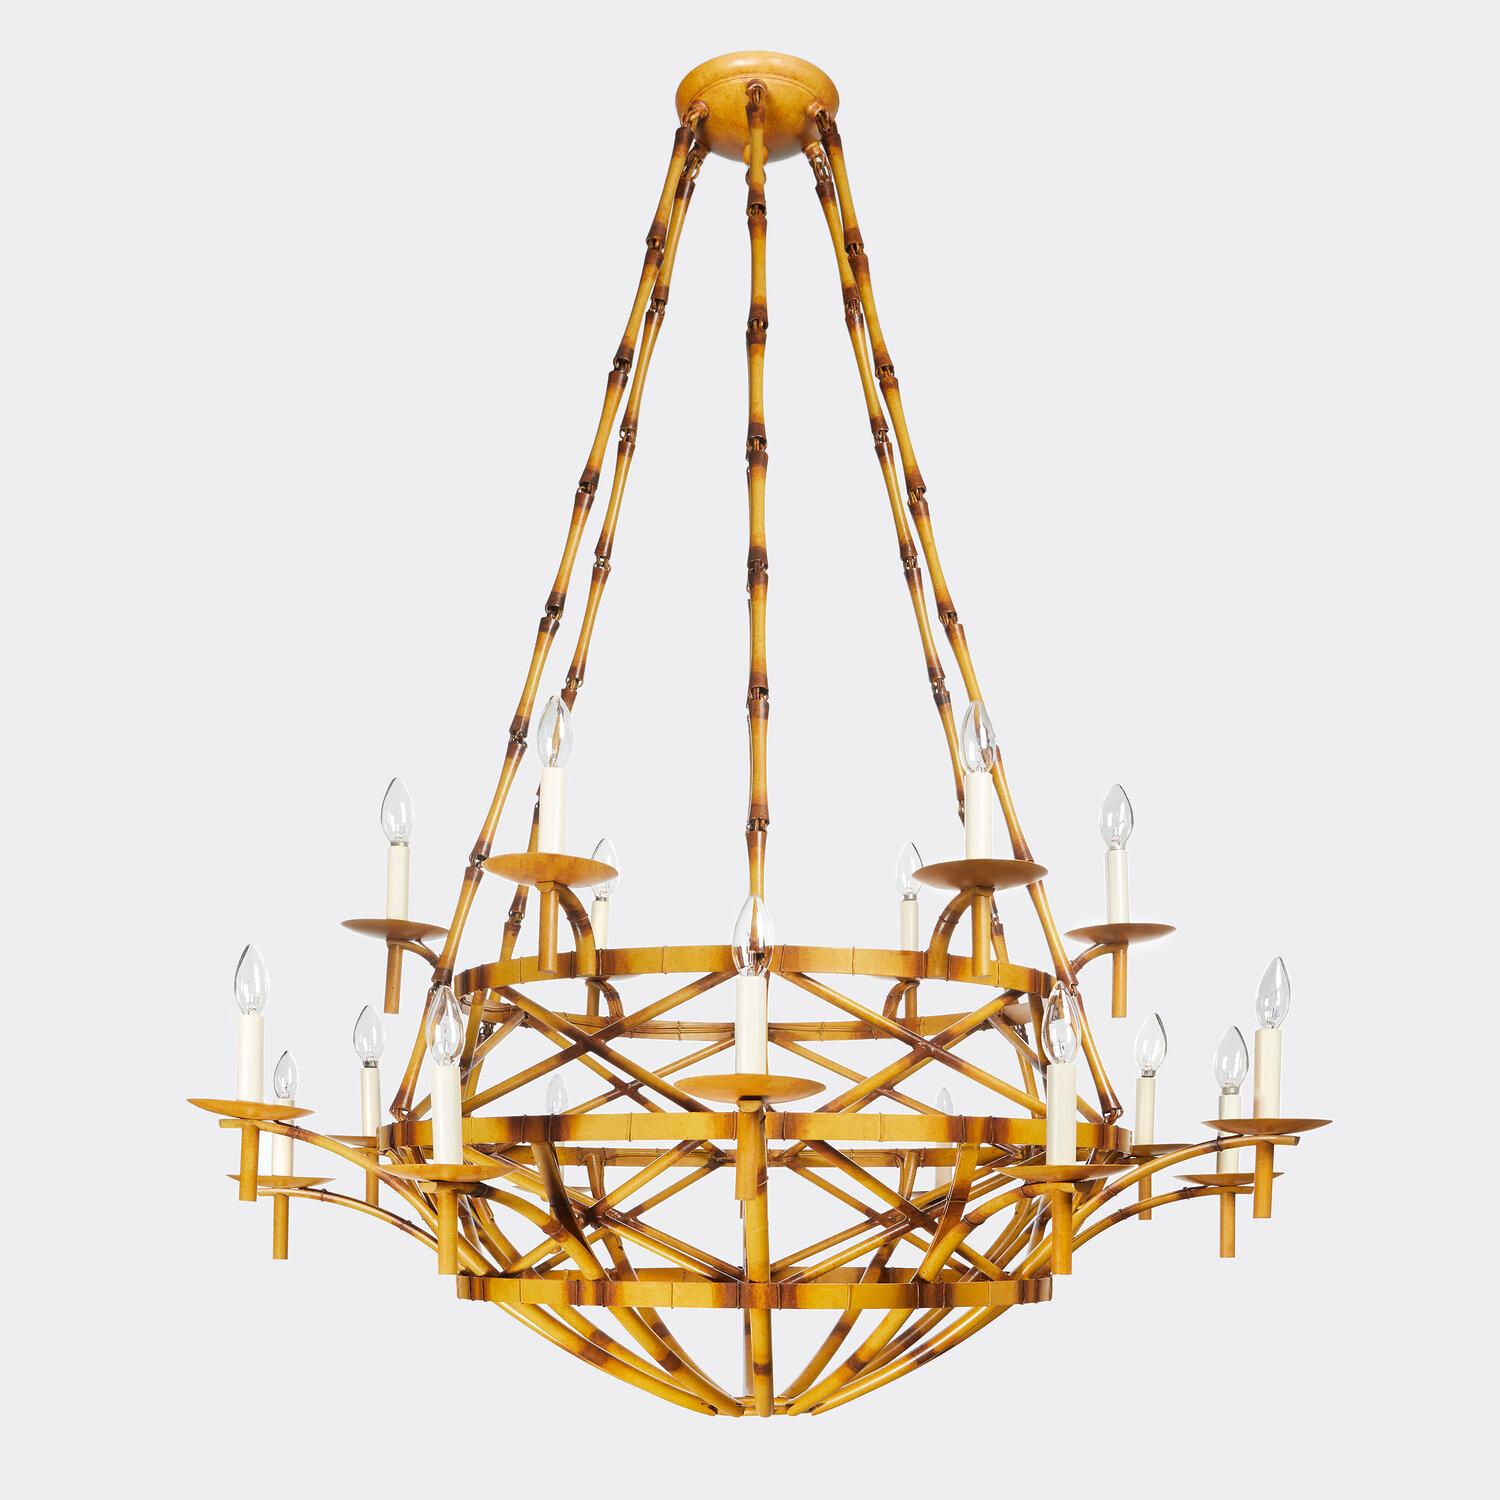 An 18-light brass basket-form chandelier with dish shaped bobeches, custom tapered chain links, and cross banded frame. All hand painted in an artistic faux bamboo finish. Any color of painted finish available, and available in a single-tiered